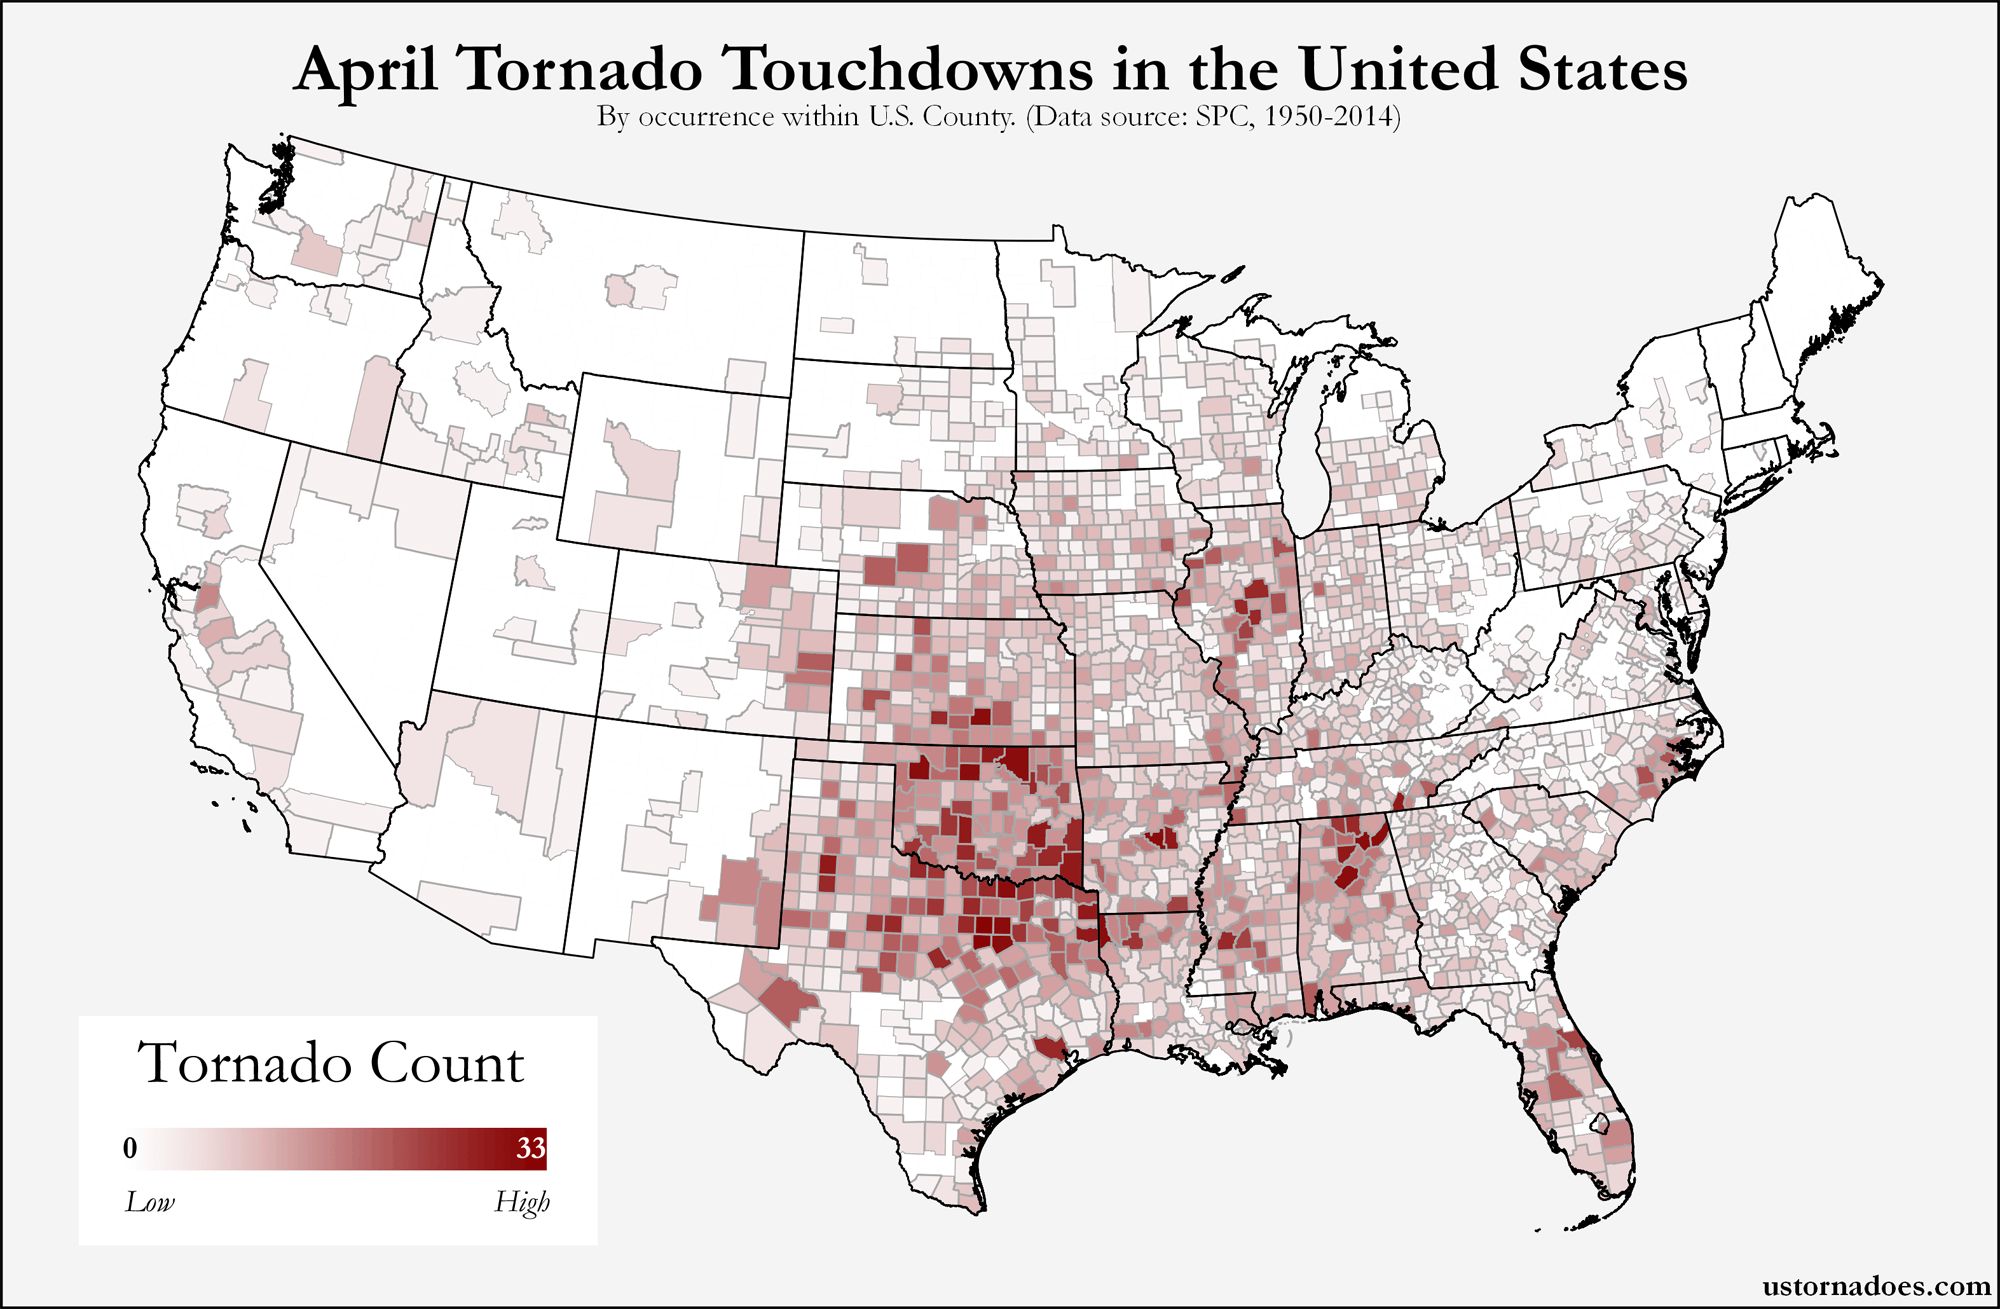 Here’s where tornadoes typically form in April across the United States